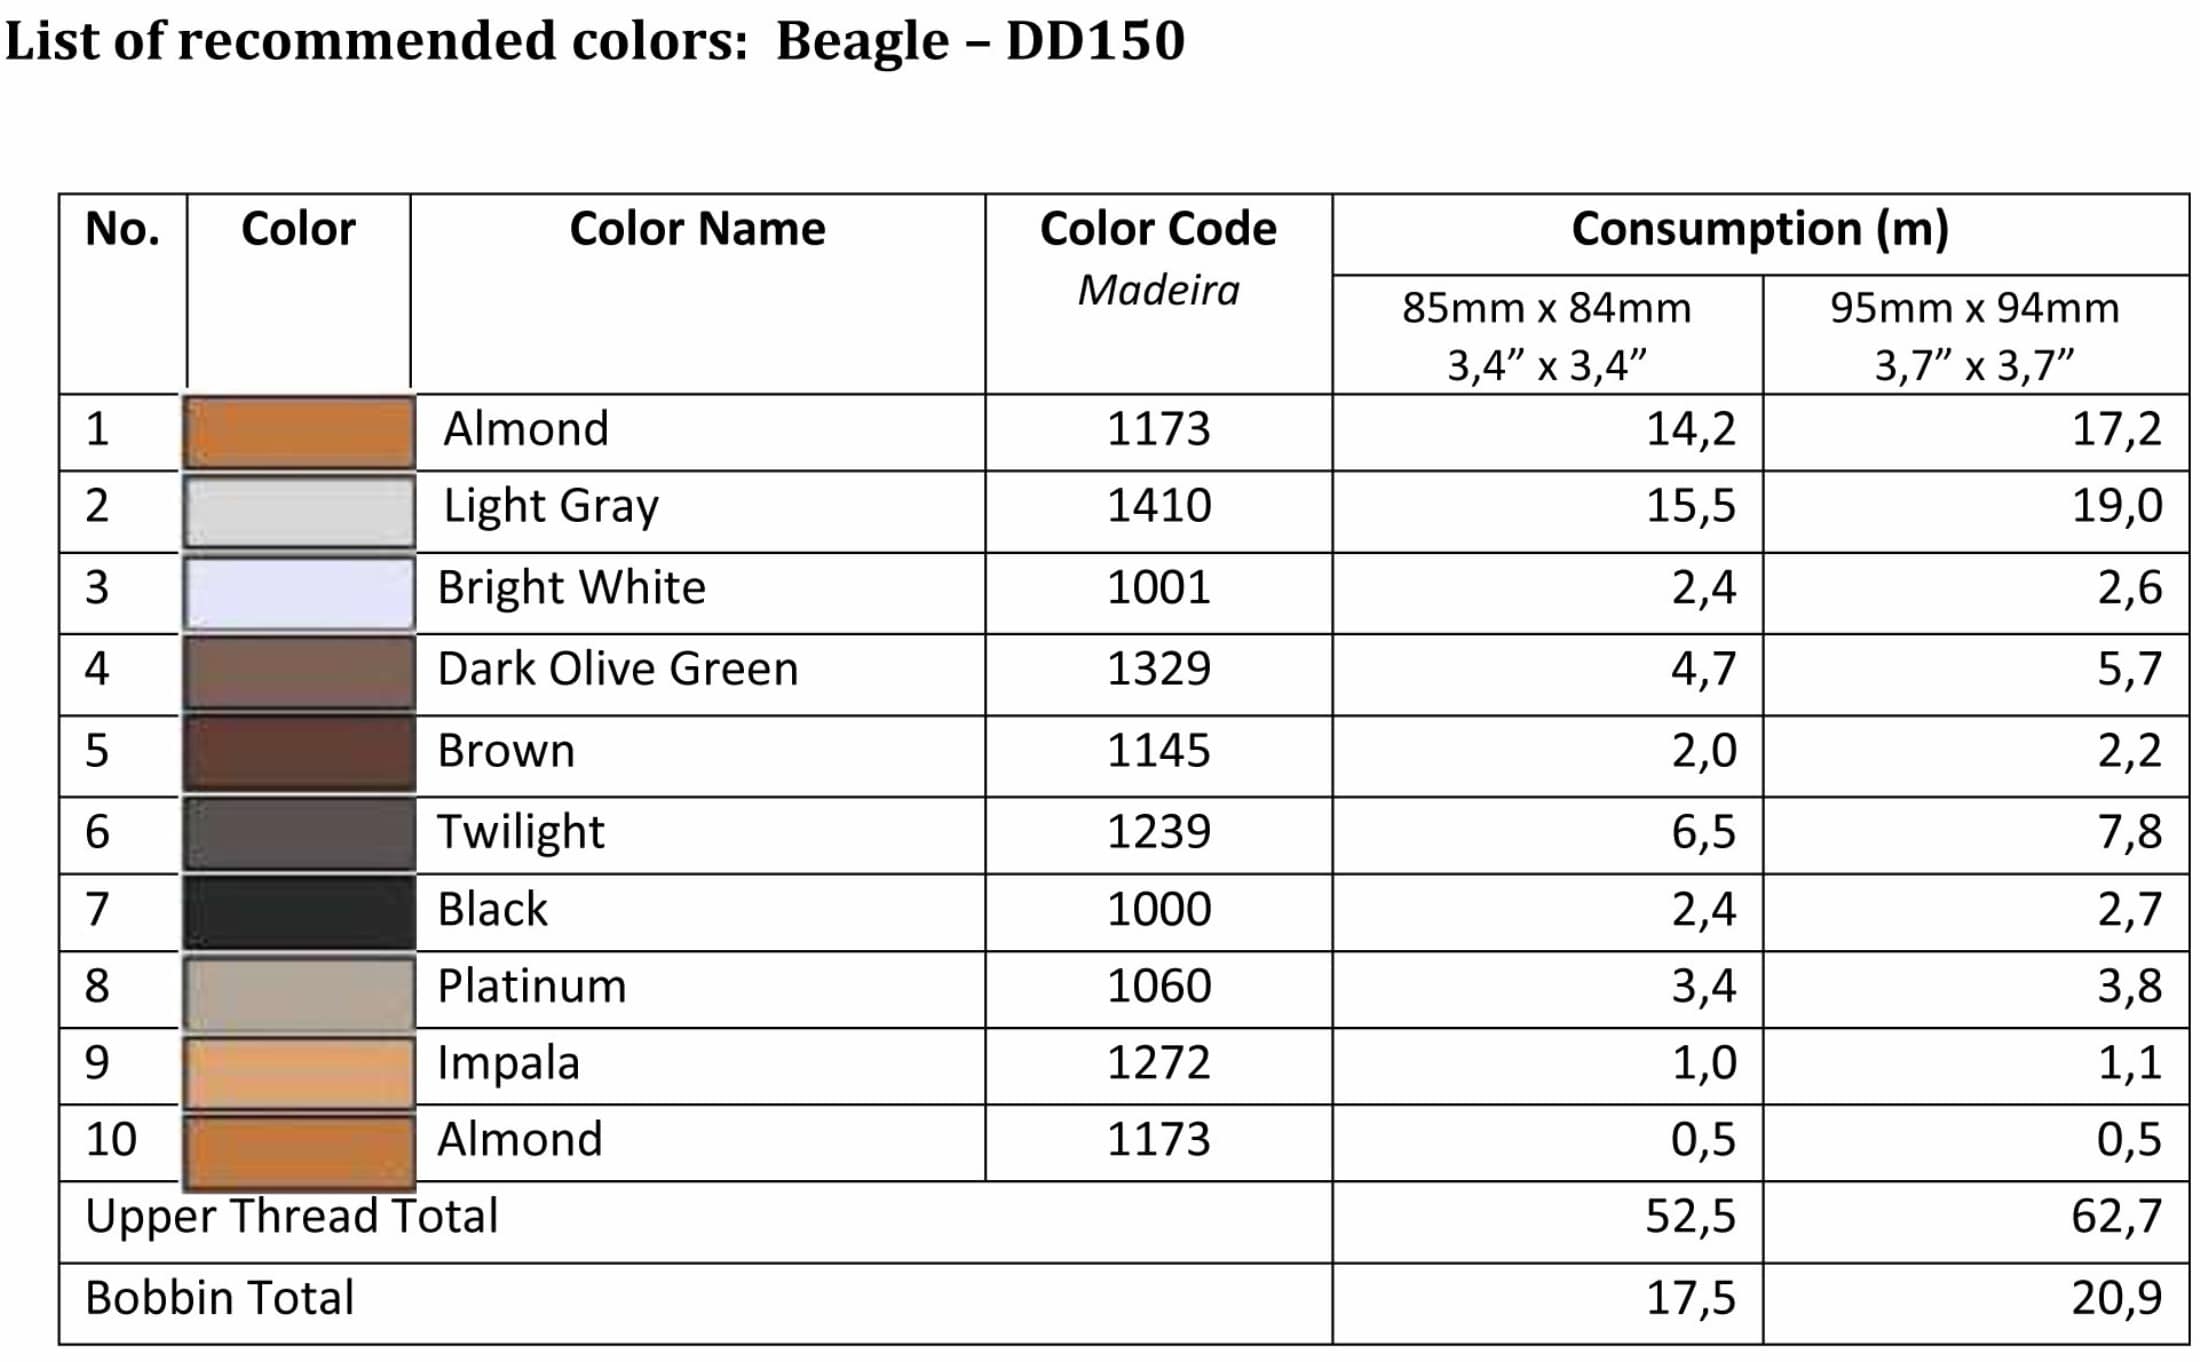 List of recommended colors - Beagle - DD150